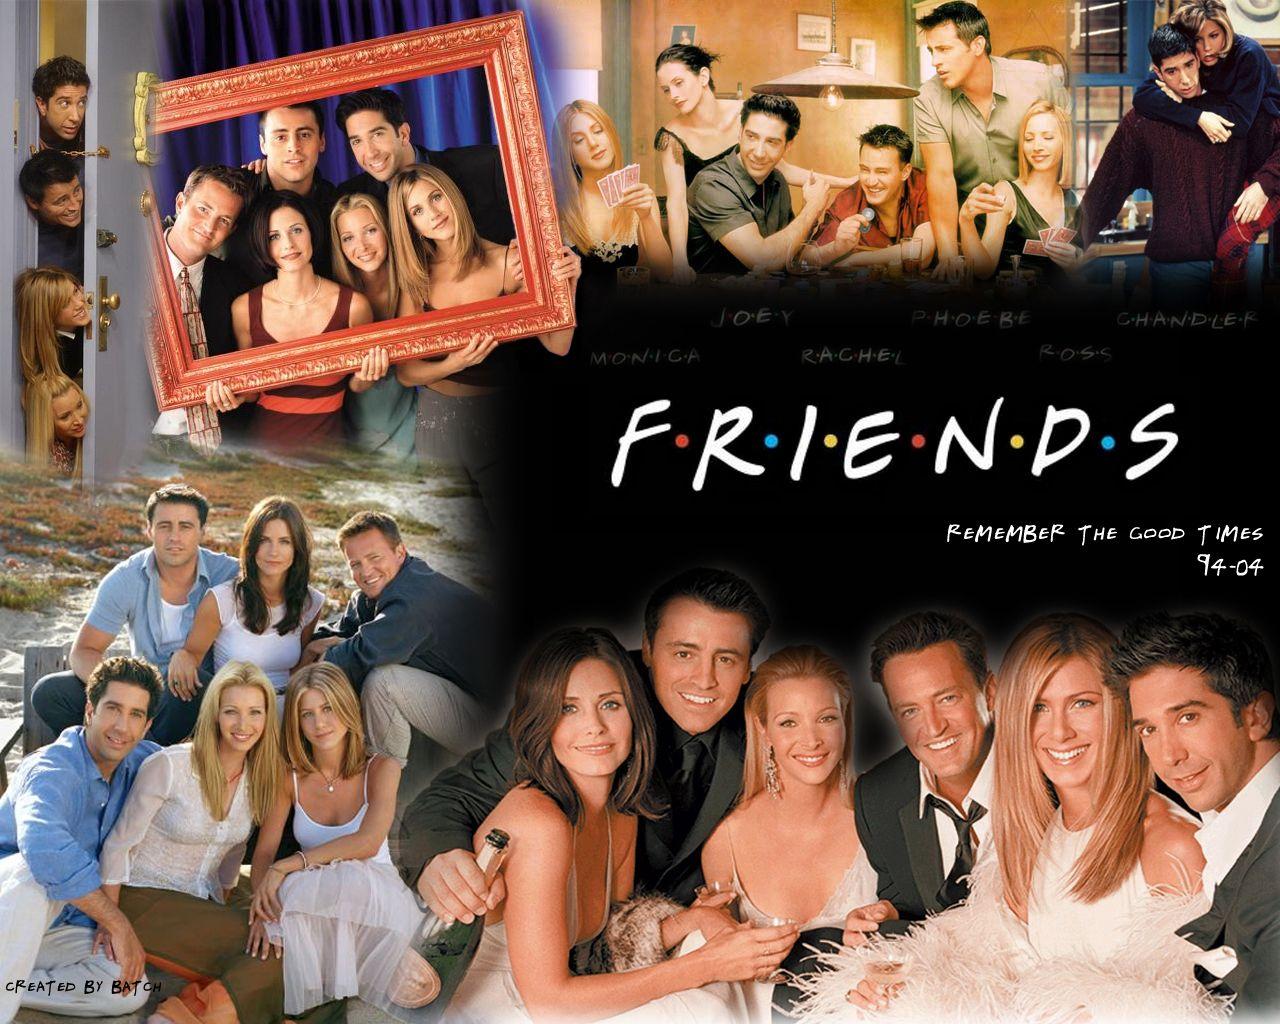 Friends Wallpaper, High Quality Friends Background and Wallpaper